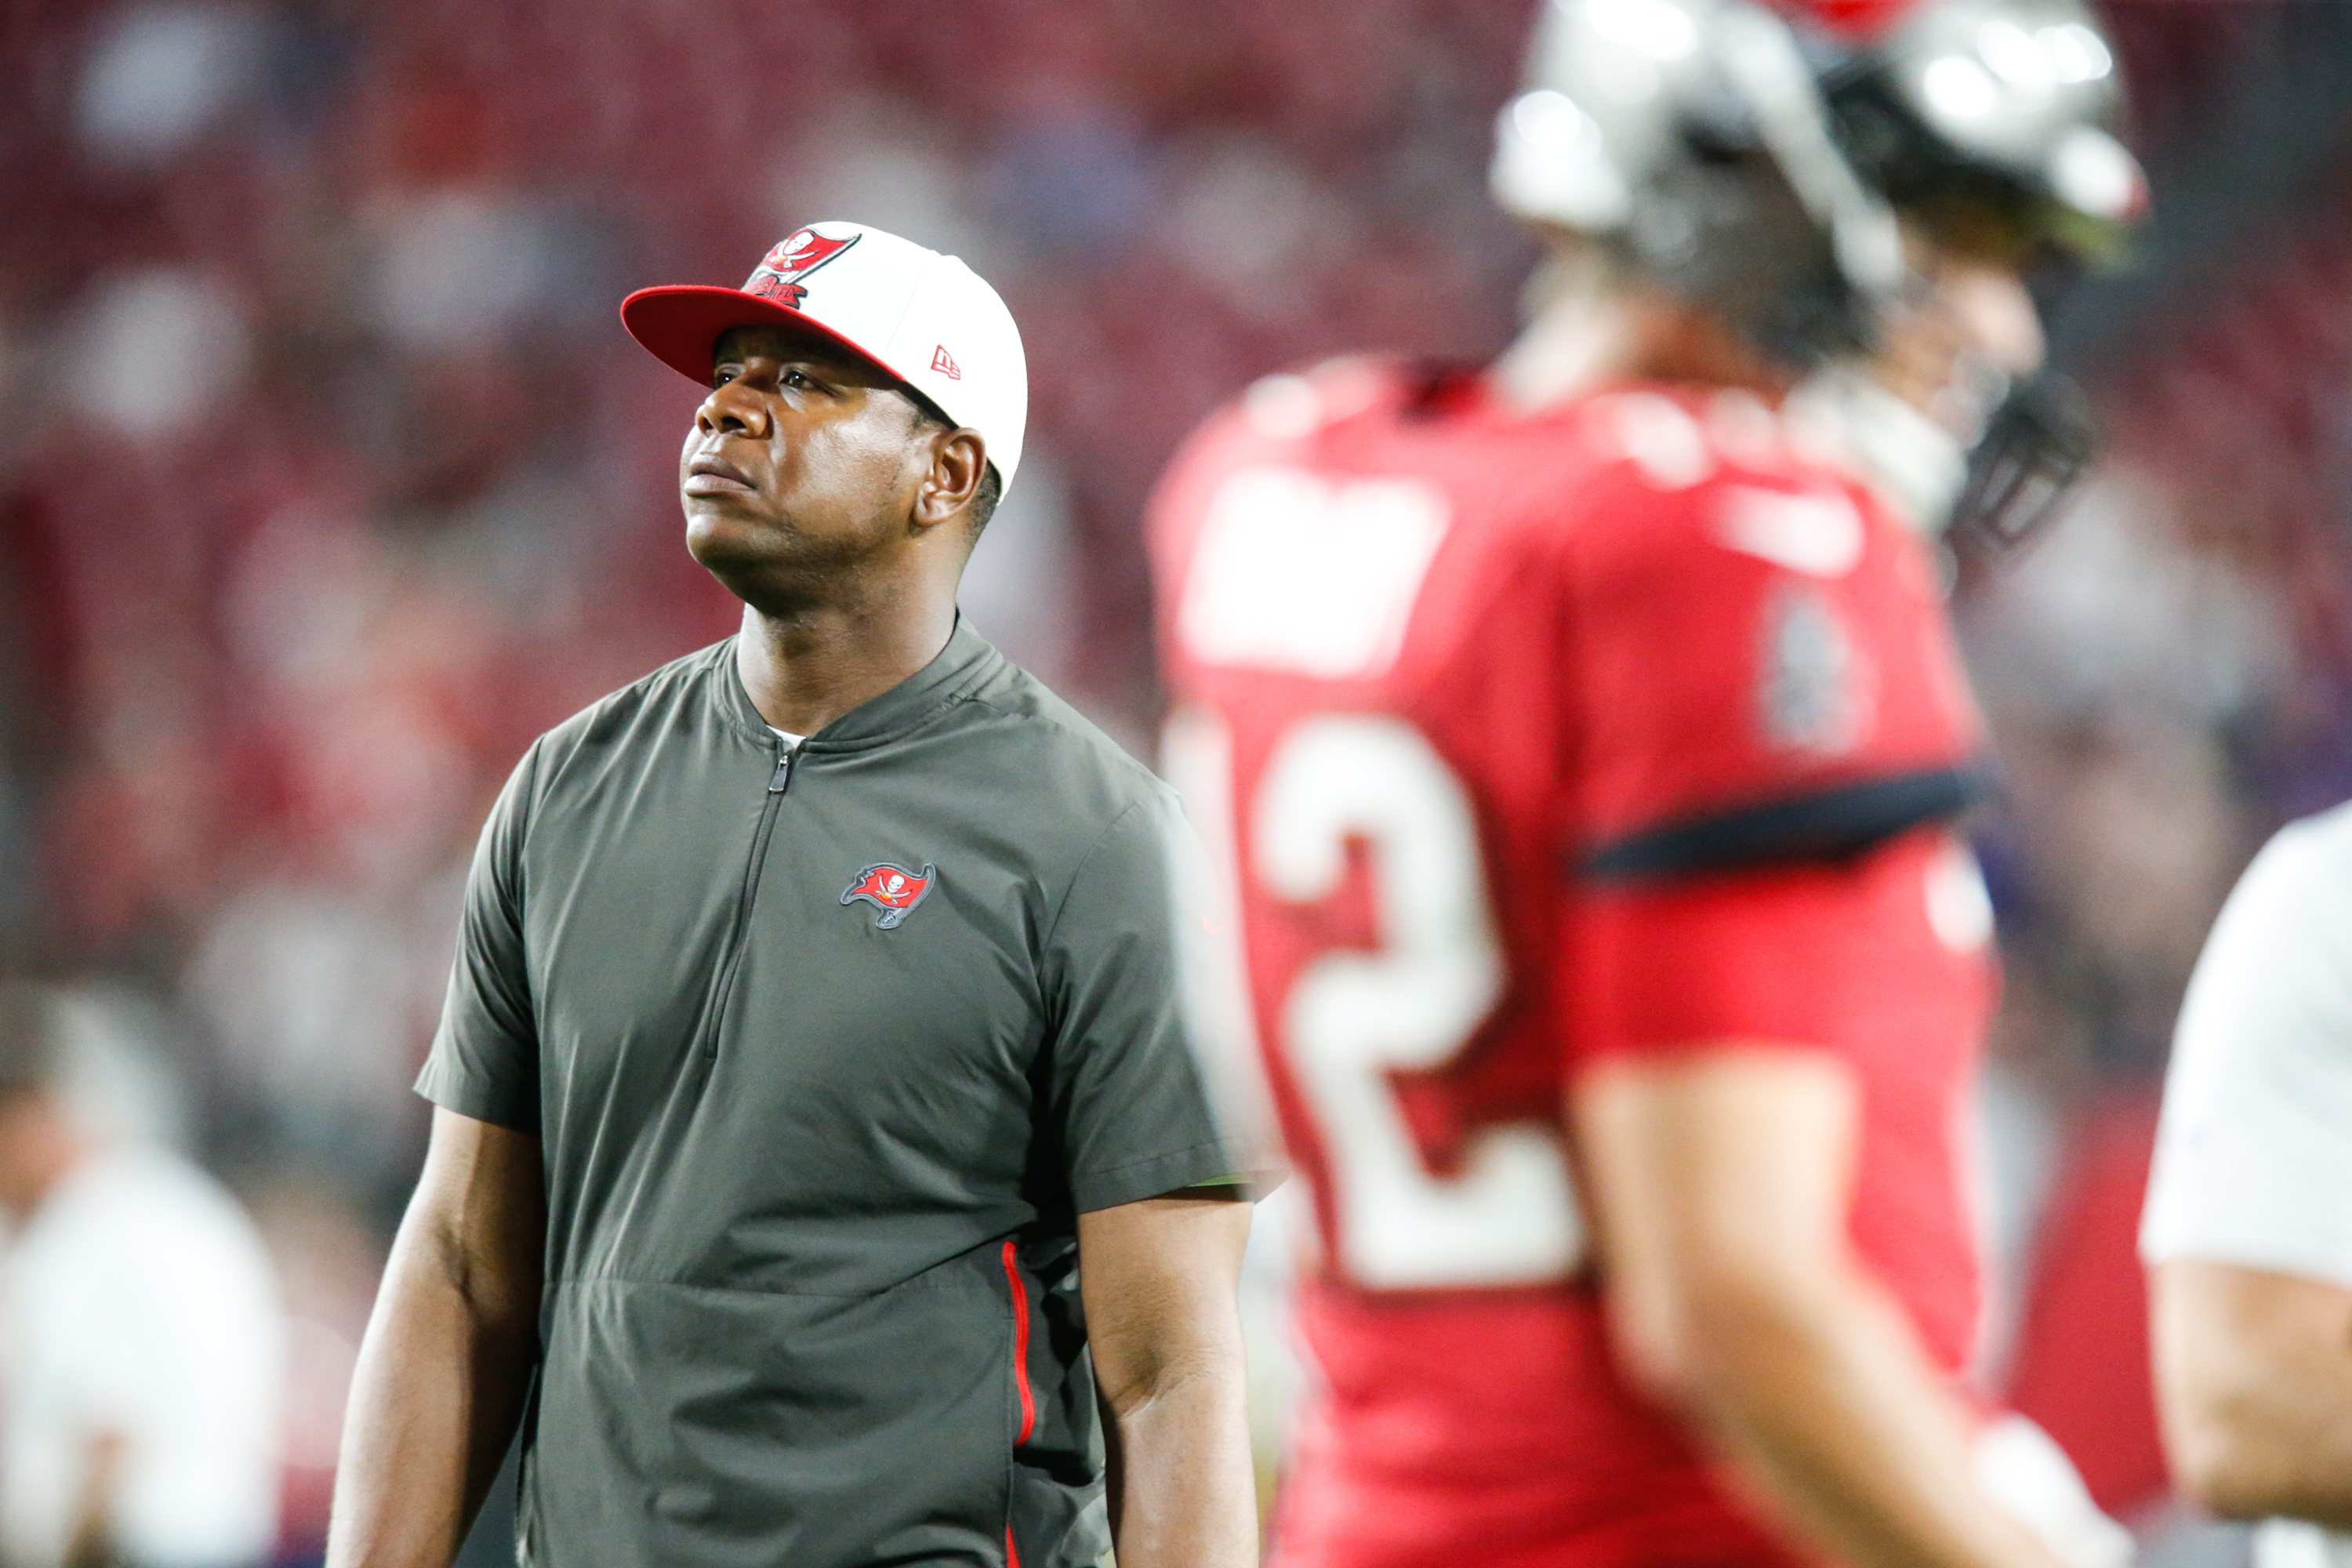 Byron Leftwich expected to be fired as Buccaneers' offensive